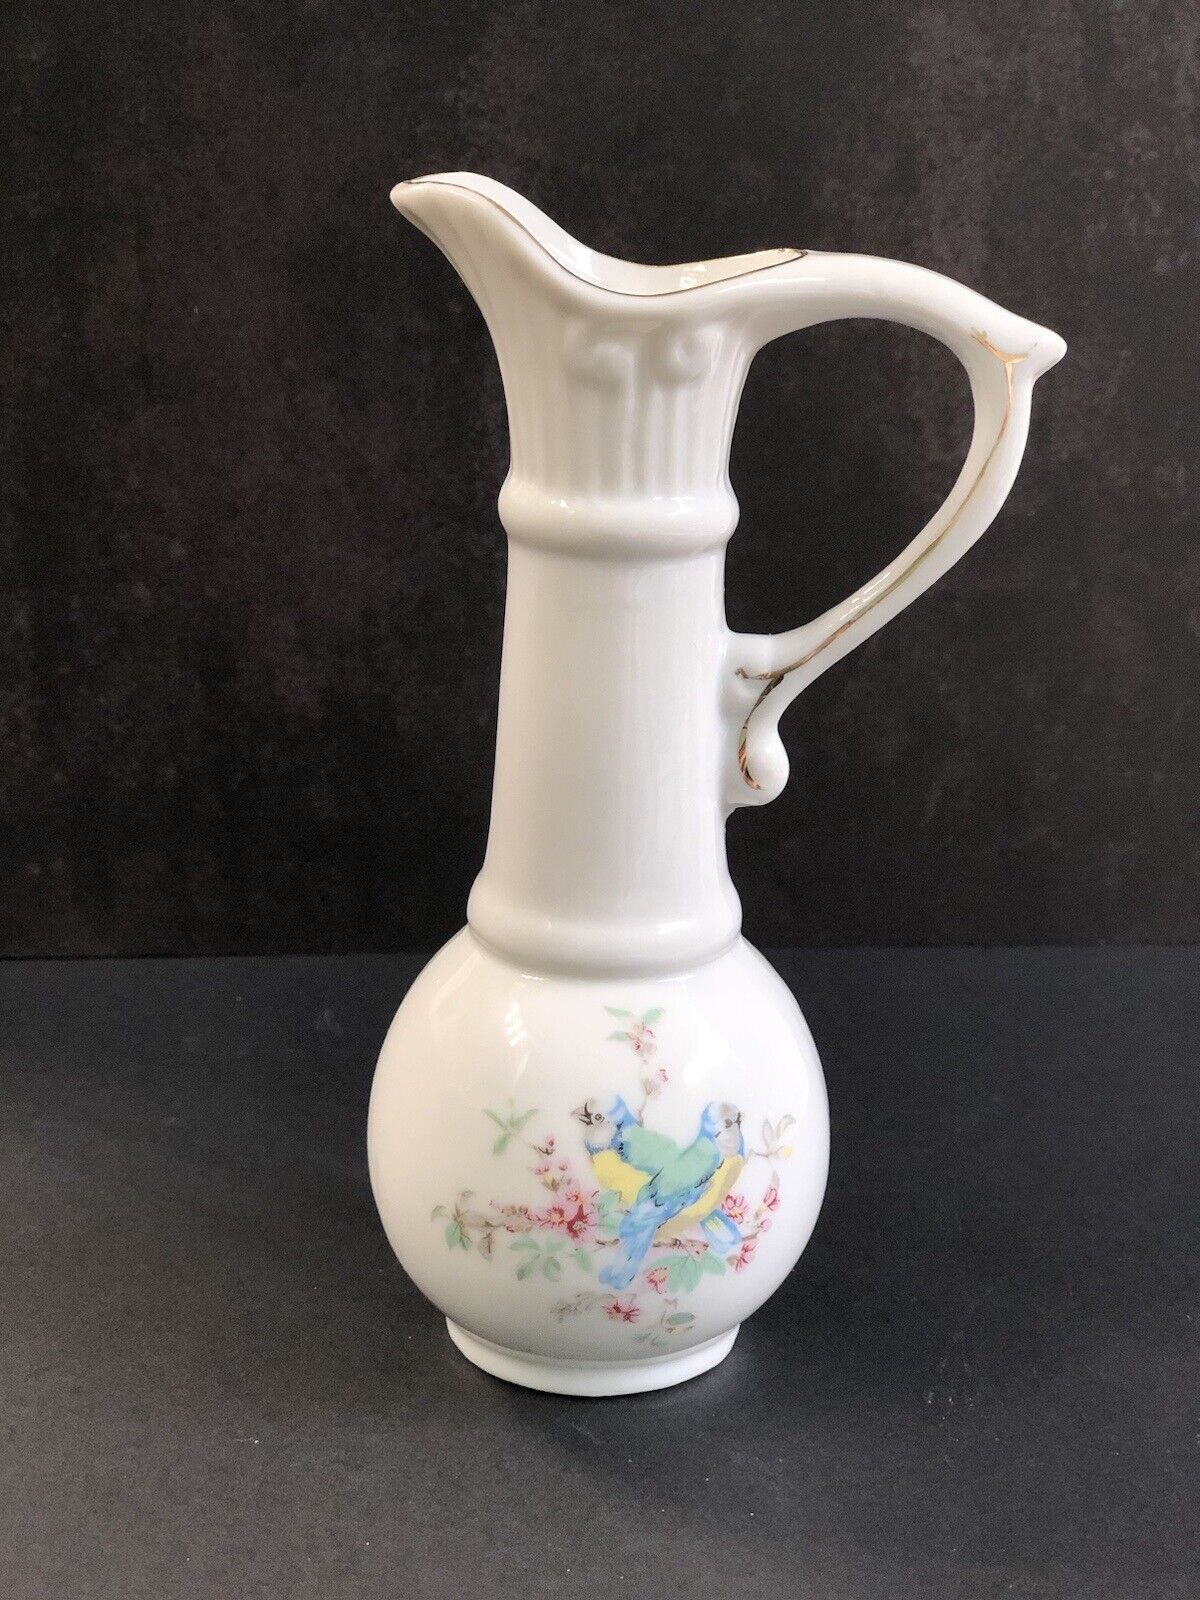 Vintage White China Bud Vase With Love Birds Painted On Front